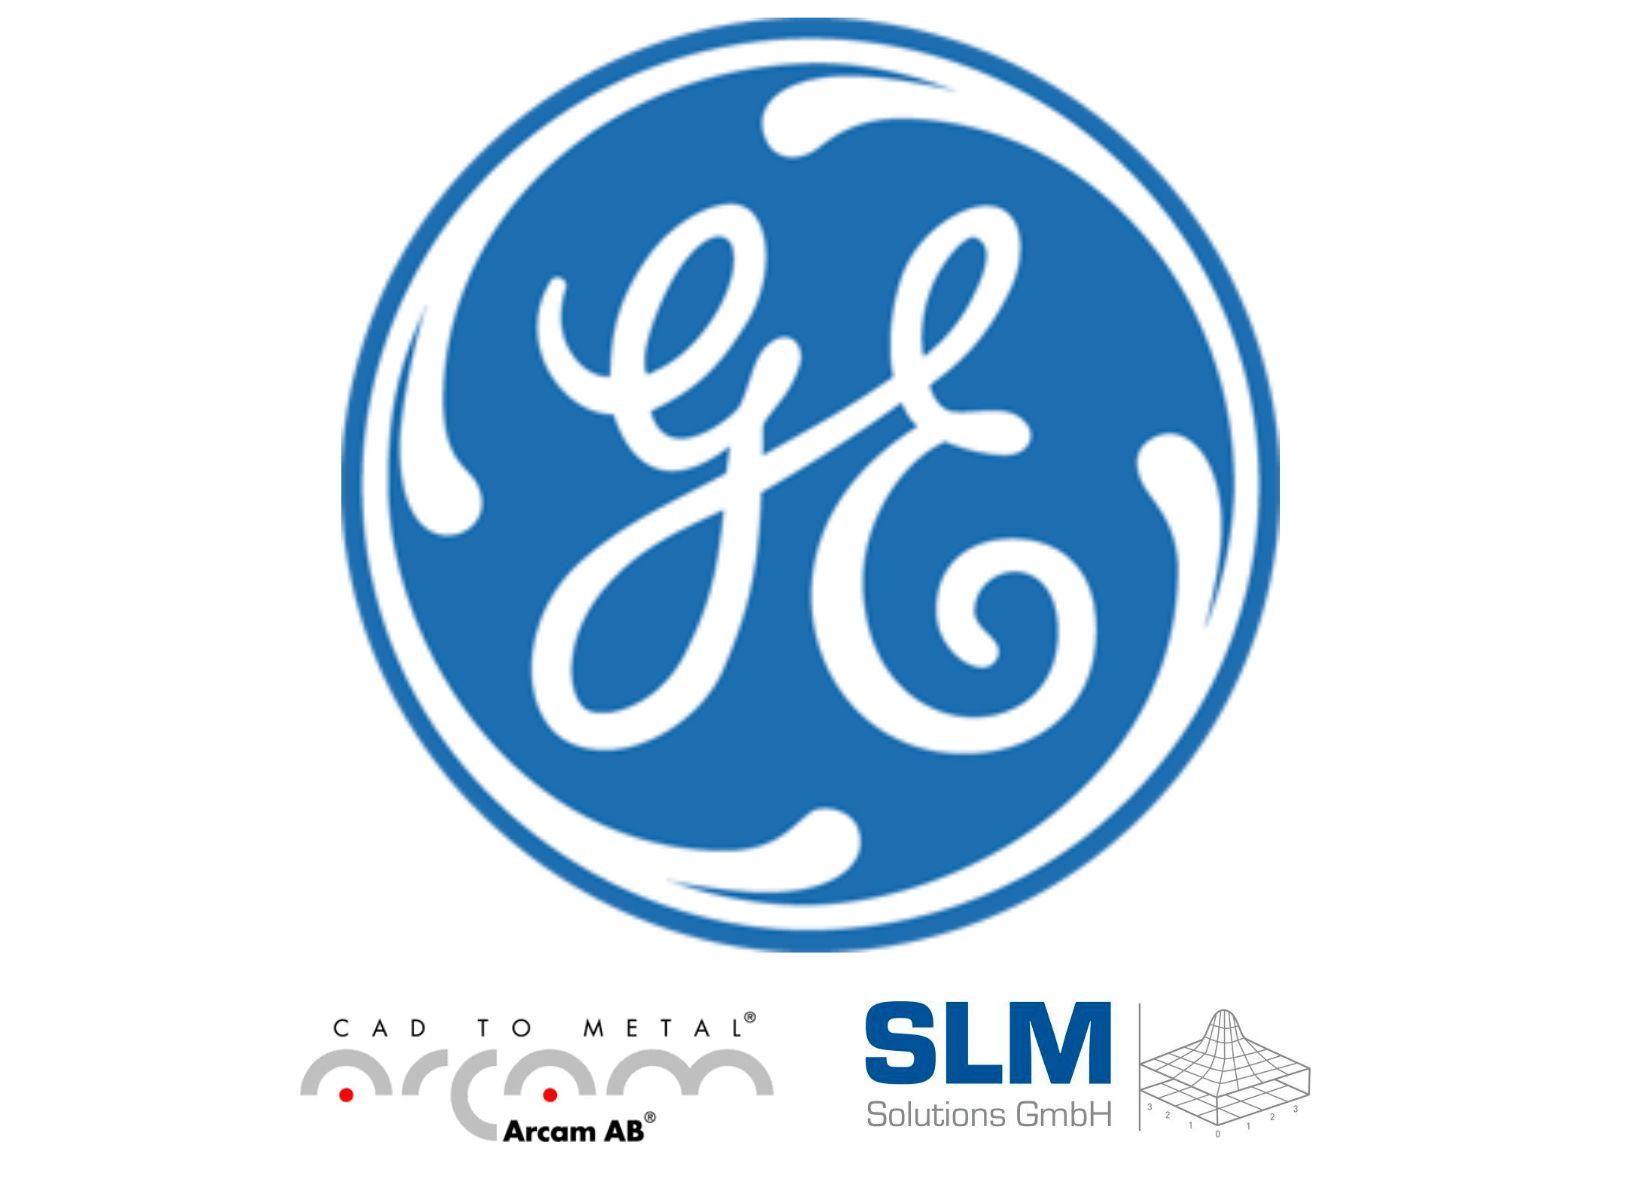 General Electric Company Logo - BREAKING: General Electric to Acquire Both Arcam AND SLM!. General